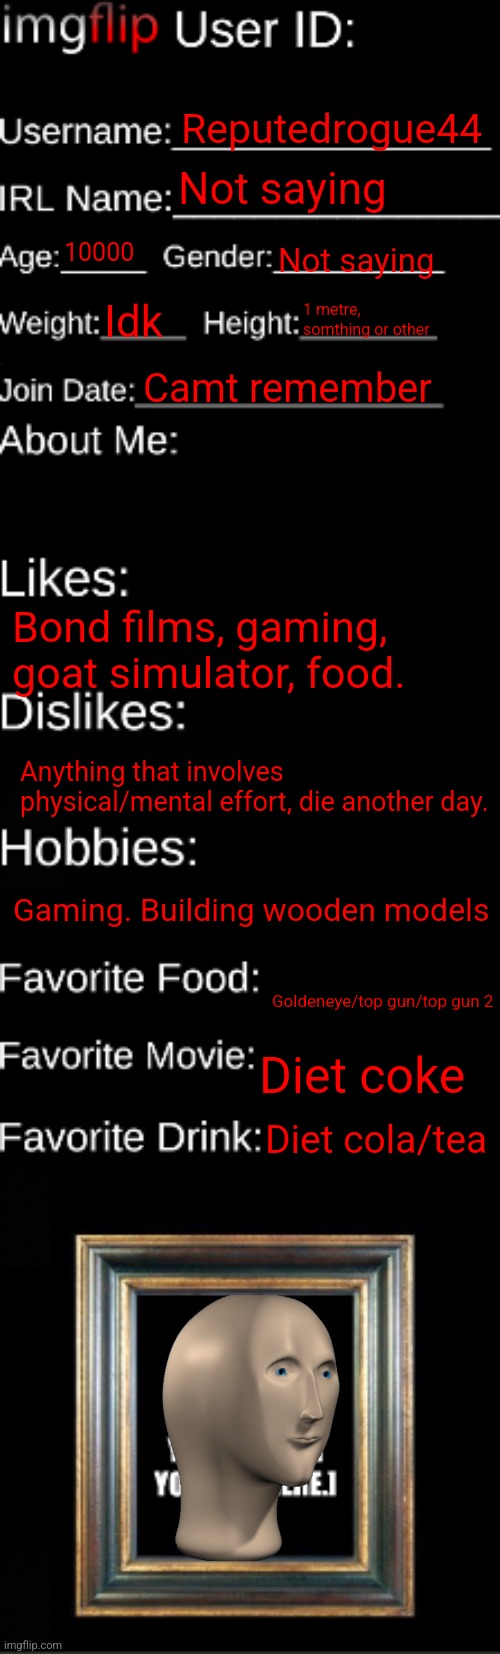 imgflip ID Card |  Reputedrogue44; Not saying; 10000; Not saying; Idk; 1 metre, somthing or other; Camt remember; Bond films, gaming, goat simulator, food. Anything that involves physical/mental effort, die another day. Gaming. Building wooden models; Goldeneye/top gun/top gun 2; Diet coke; Diet cola/tea | image tagged in imgflip id card | made w/ Imgflip meme maker